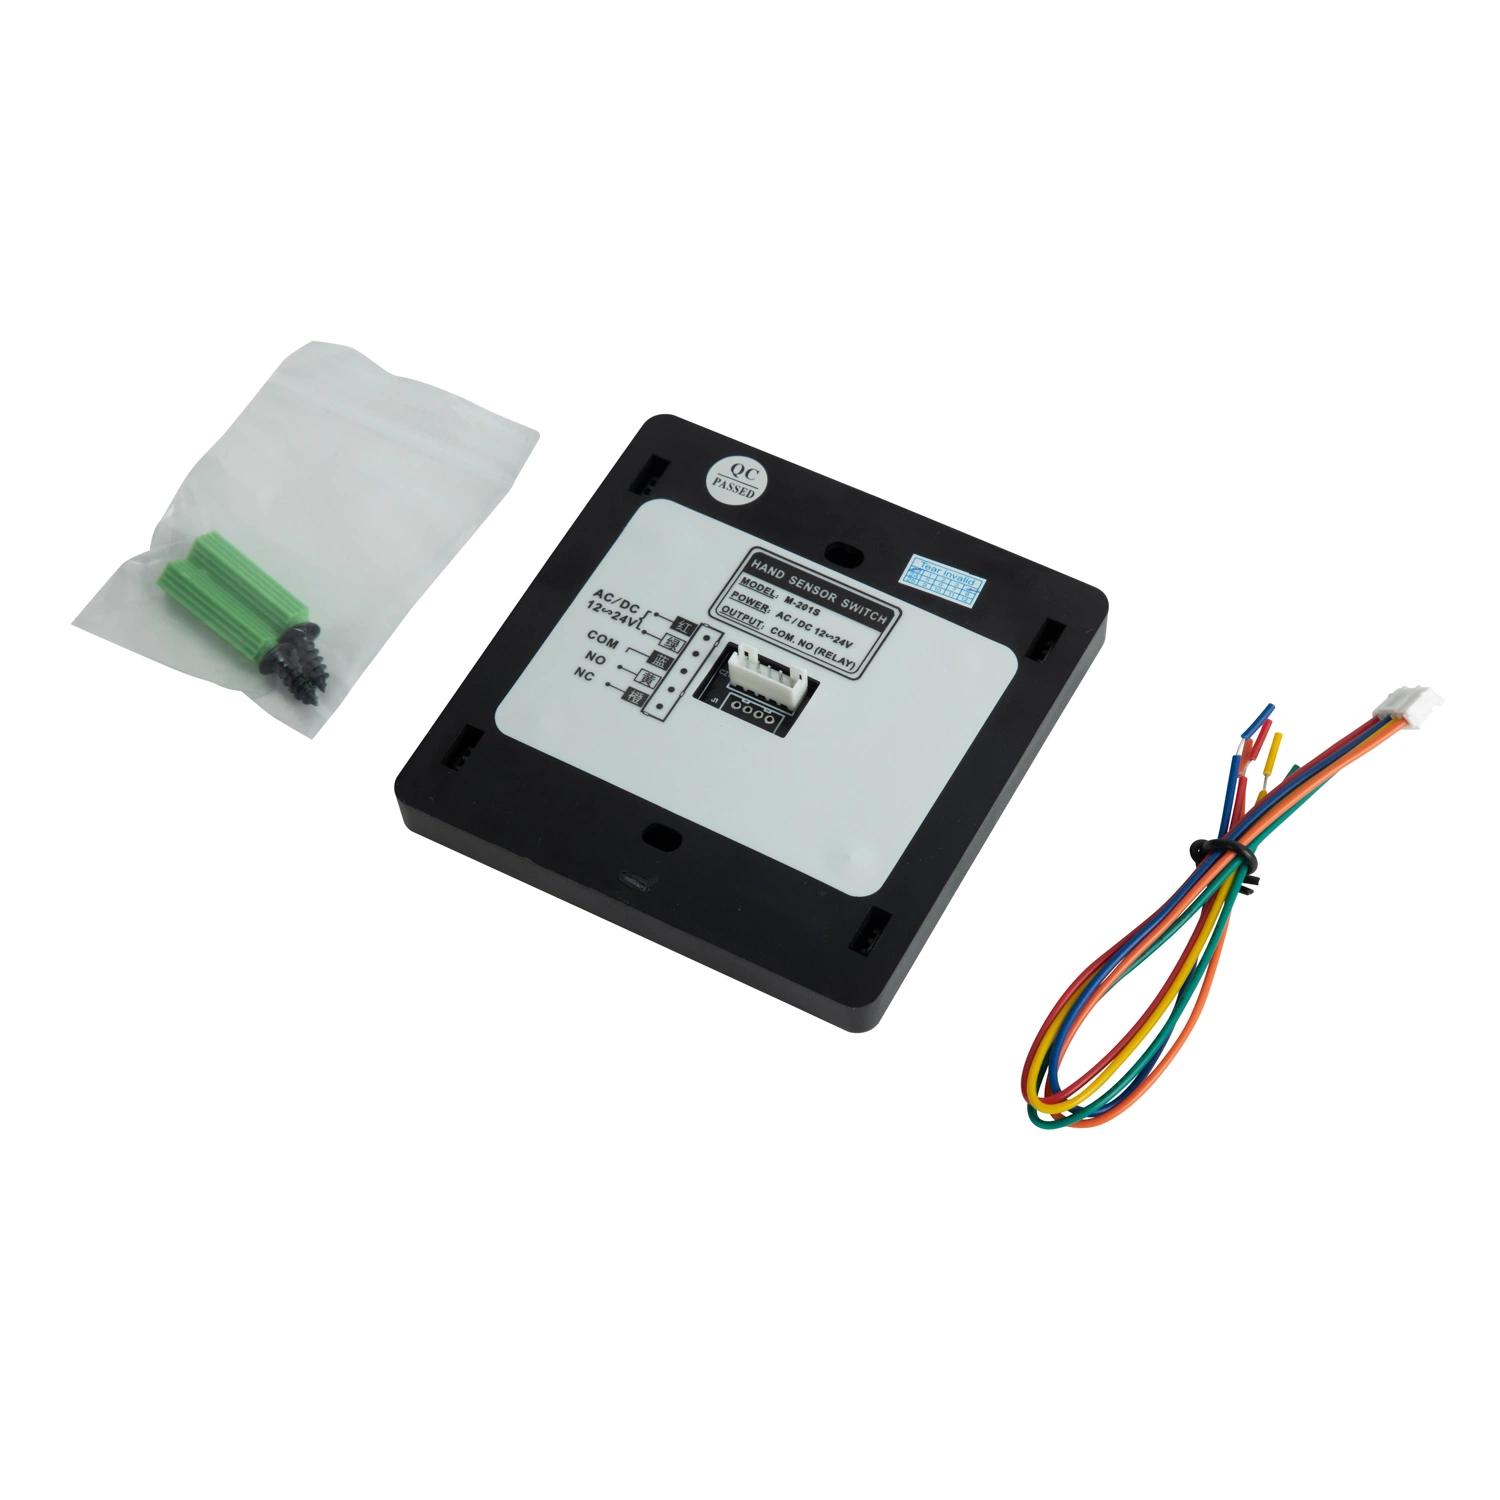 Infrared Hand Sensor Touchless Switch for Auto Door